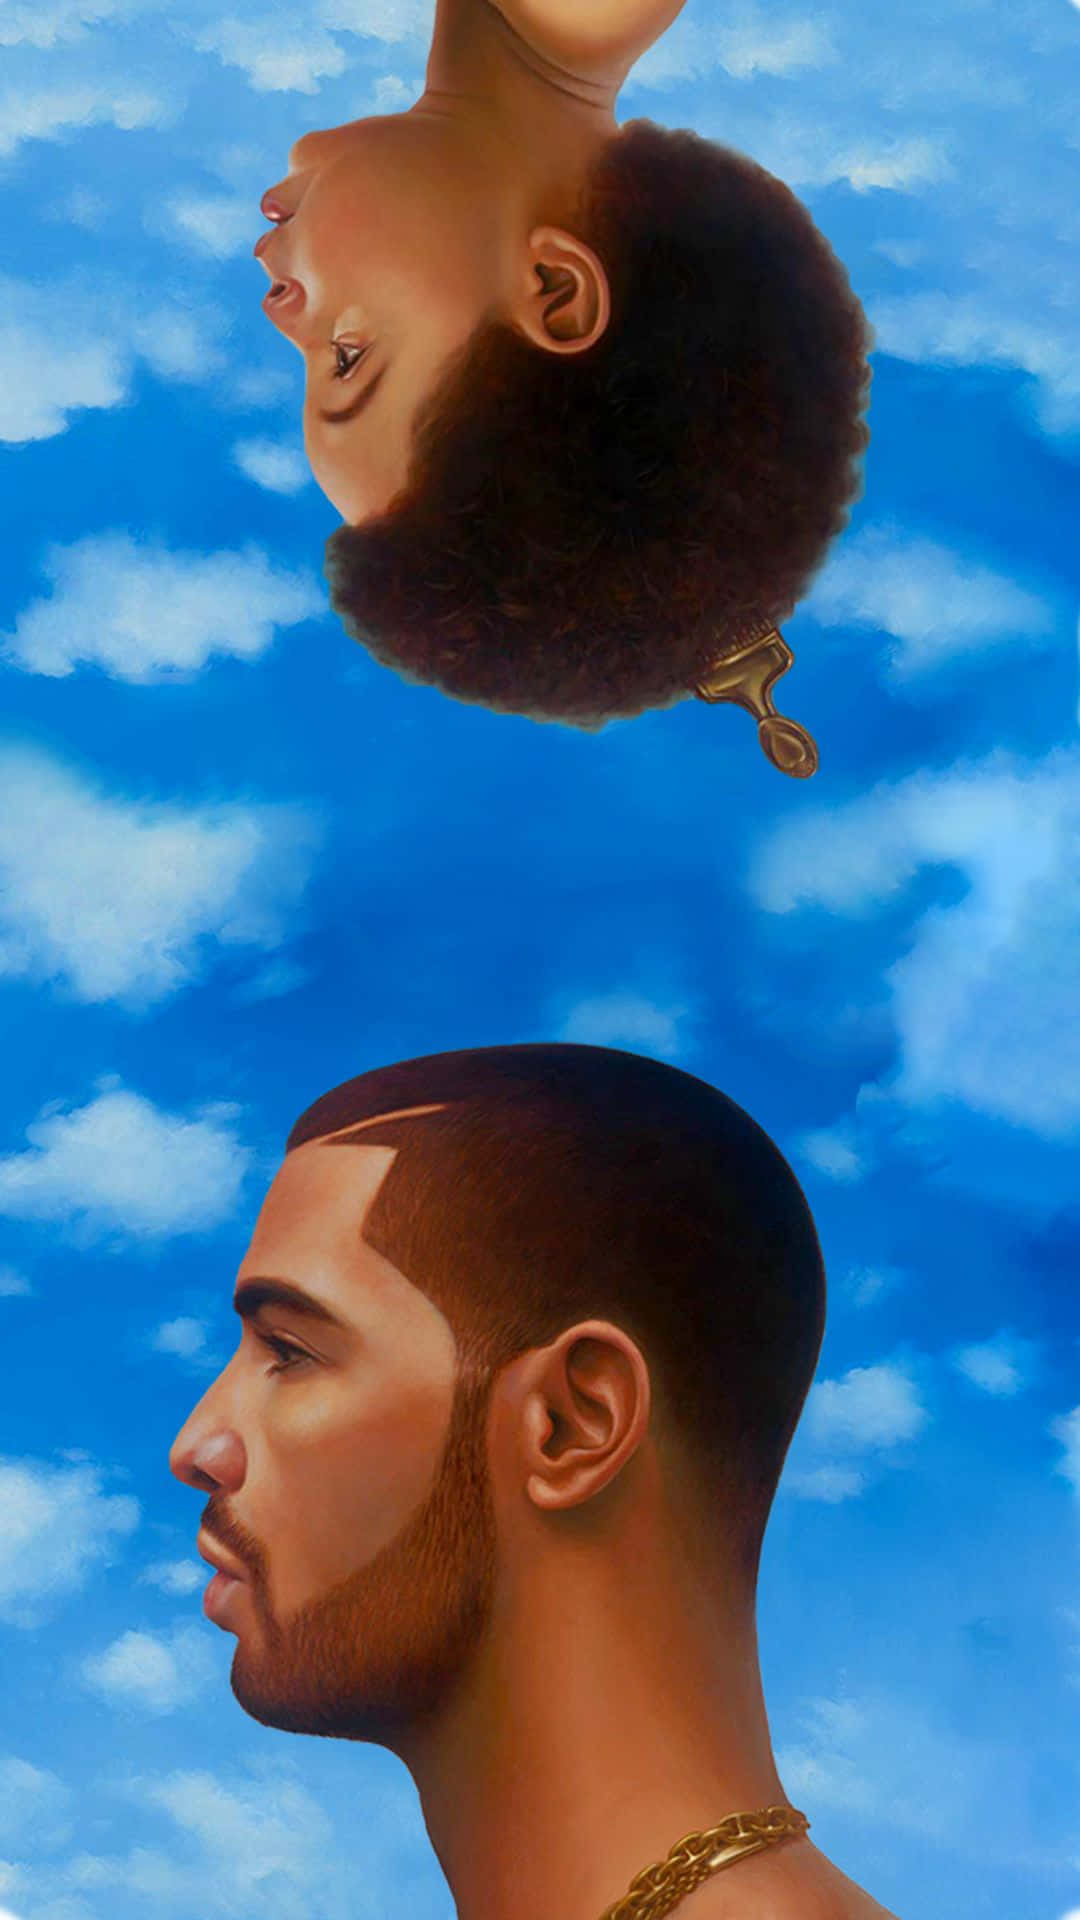 Drake's new album art was drawn by a 5-year-old